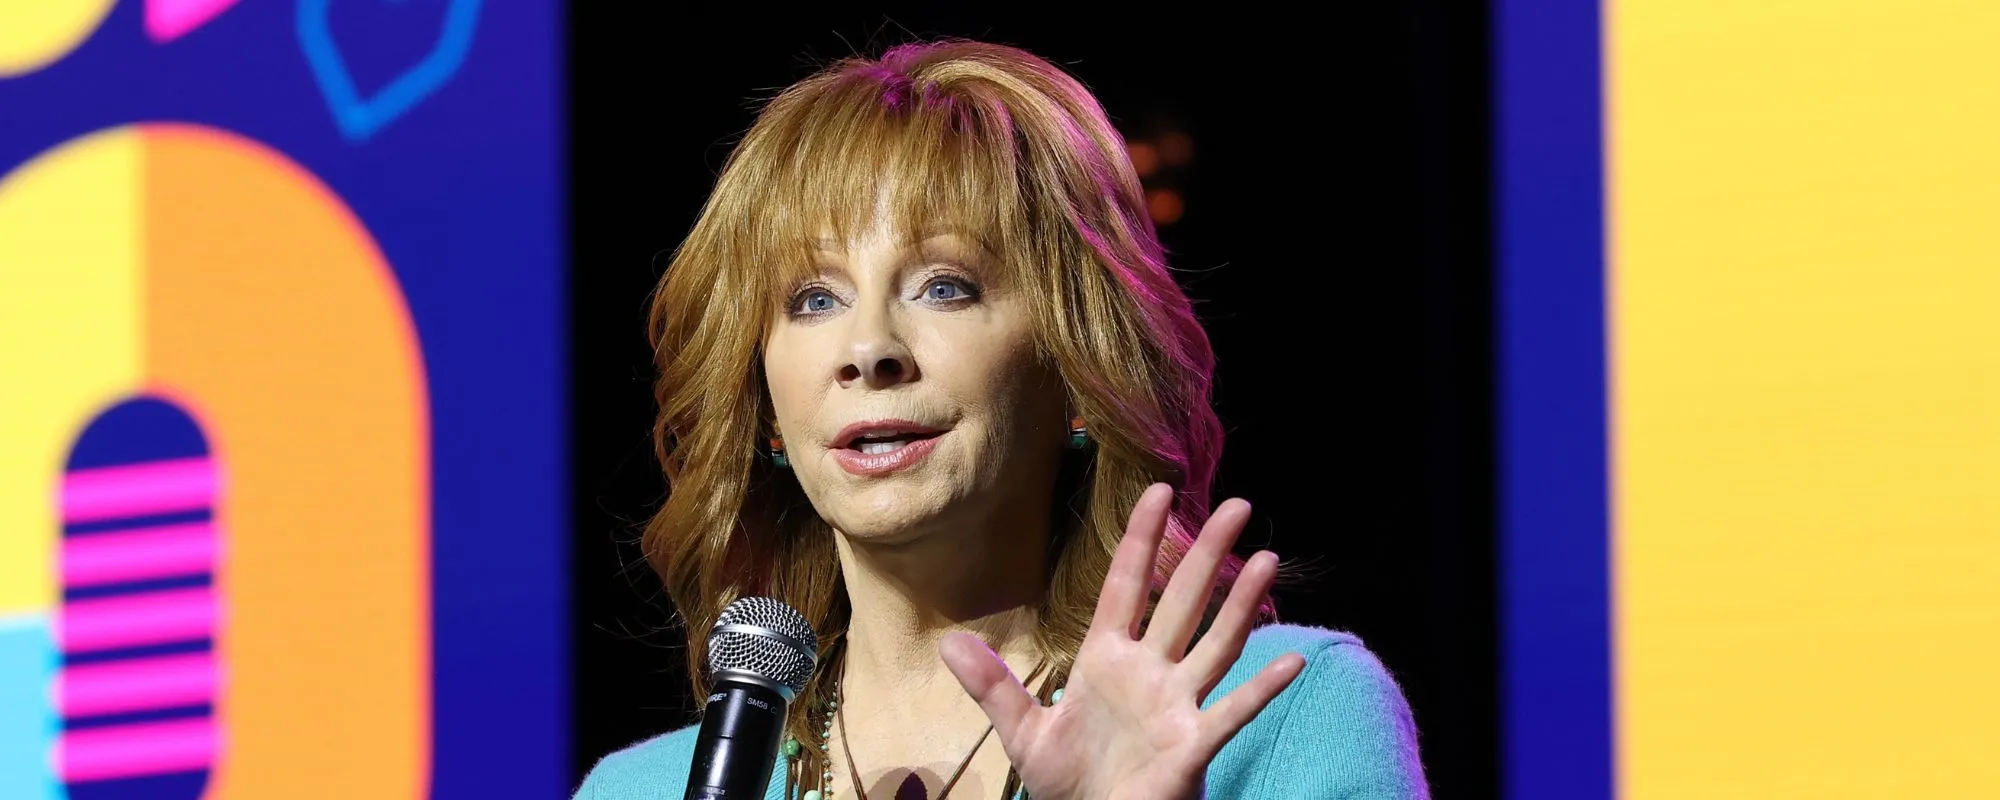 Reba McEntire & ‘The Voice’ Contestant Have Perfect Back-and-Forth on Social Media After Blind Audition